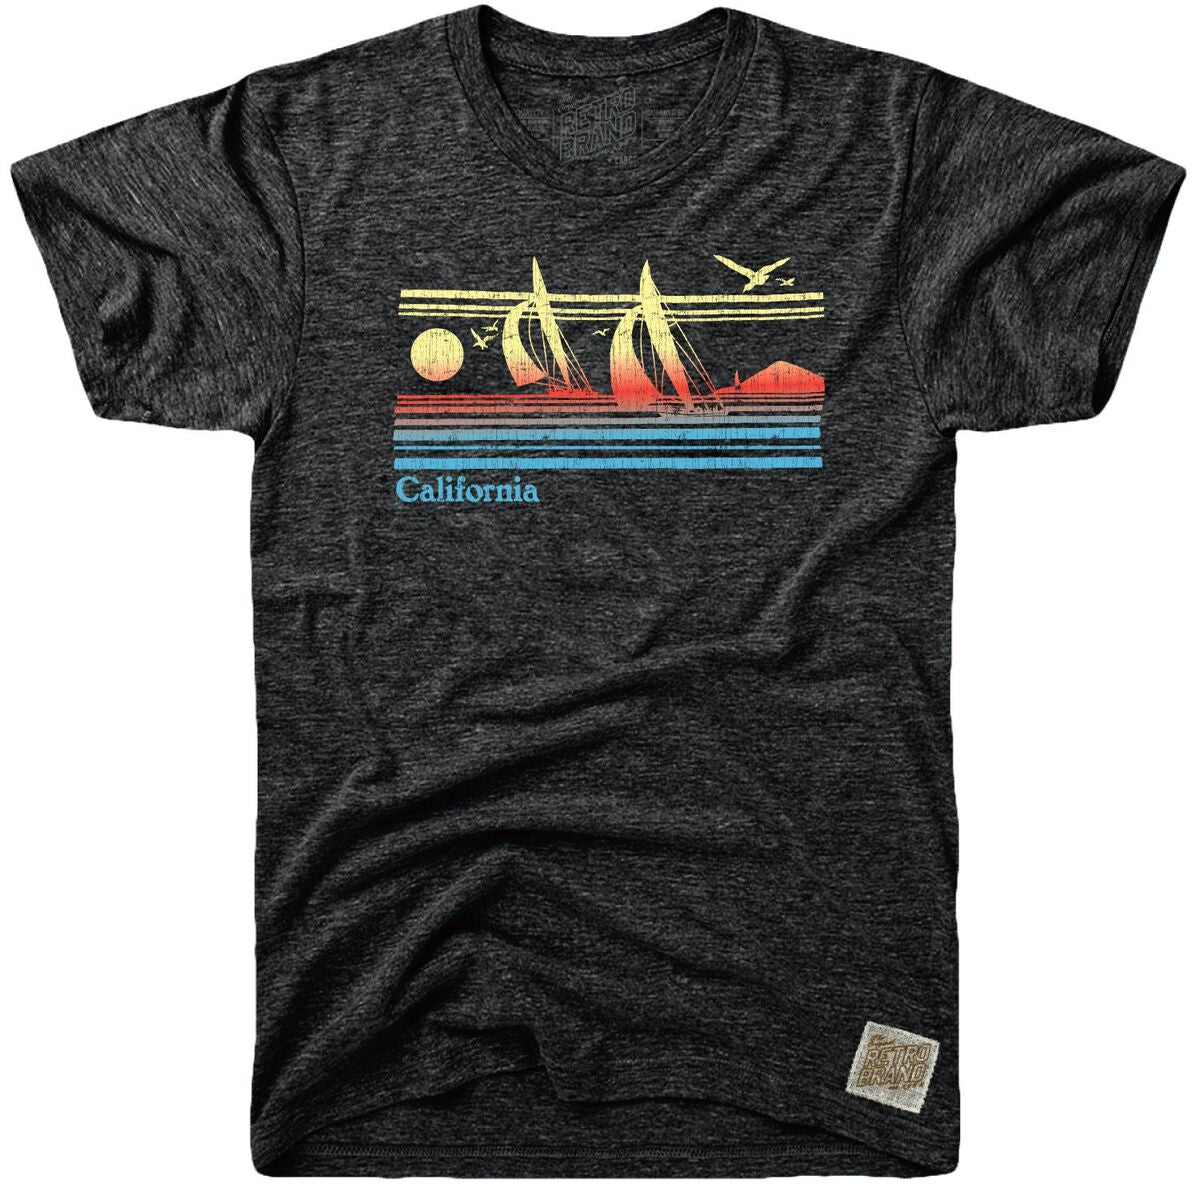 California sailboats in yellow red and blue on our tri-blend unisex tee in streaky black